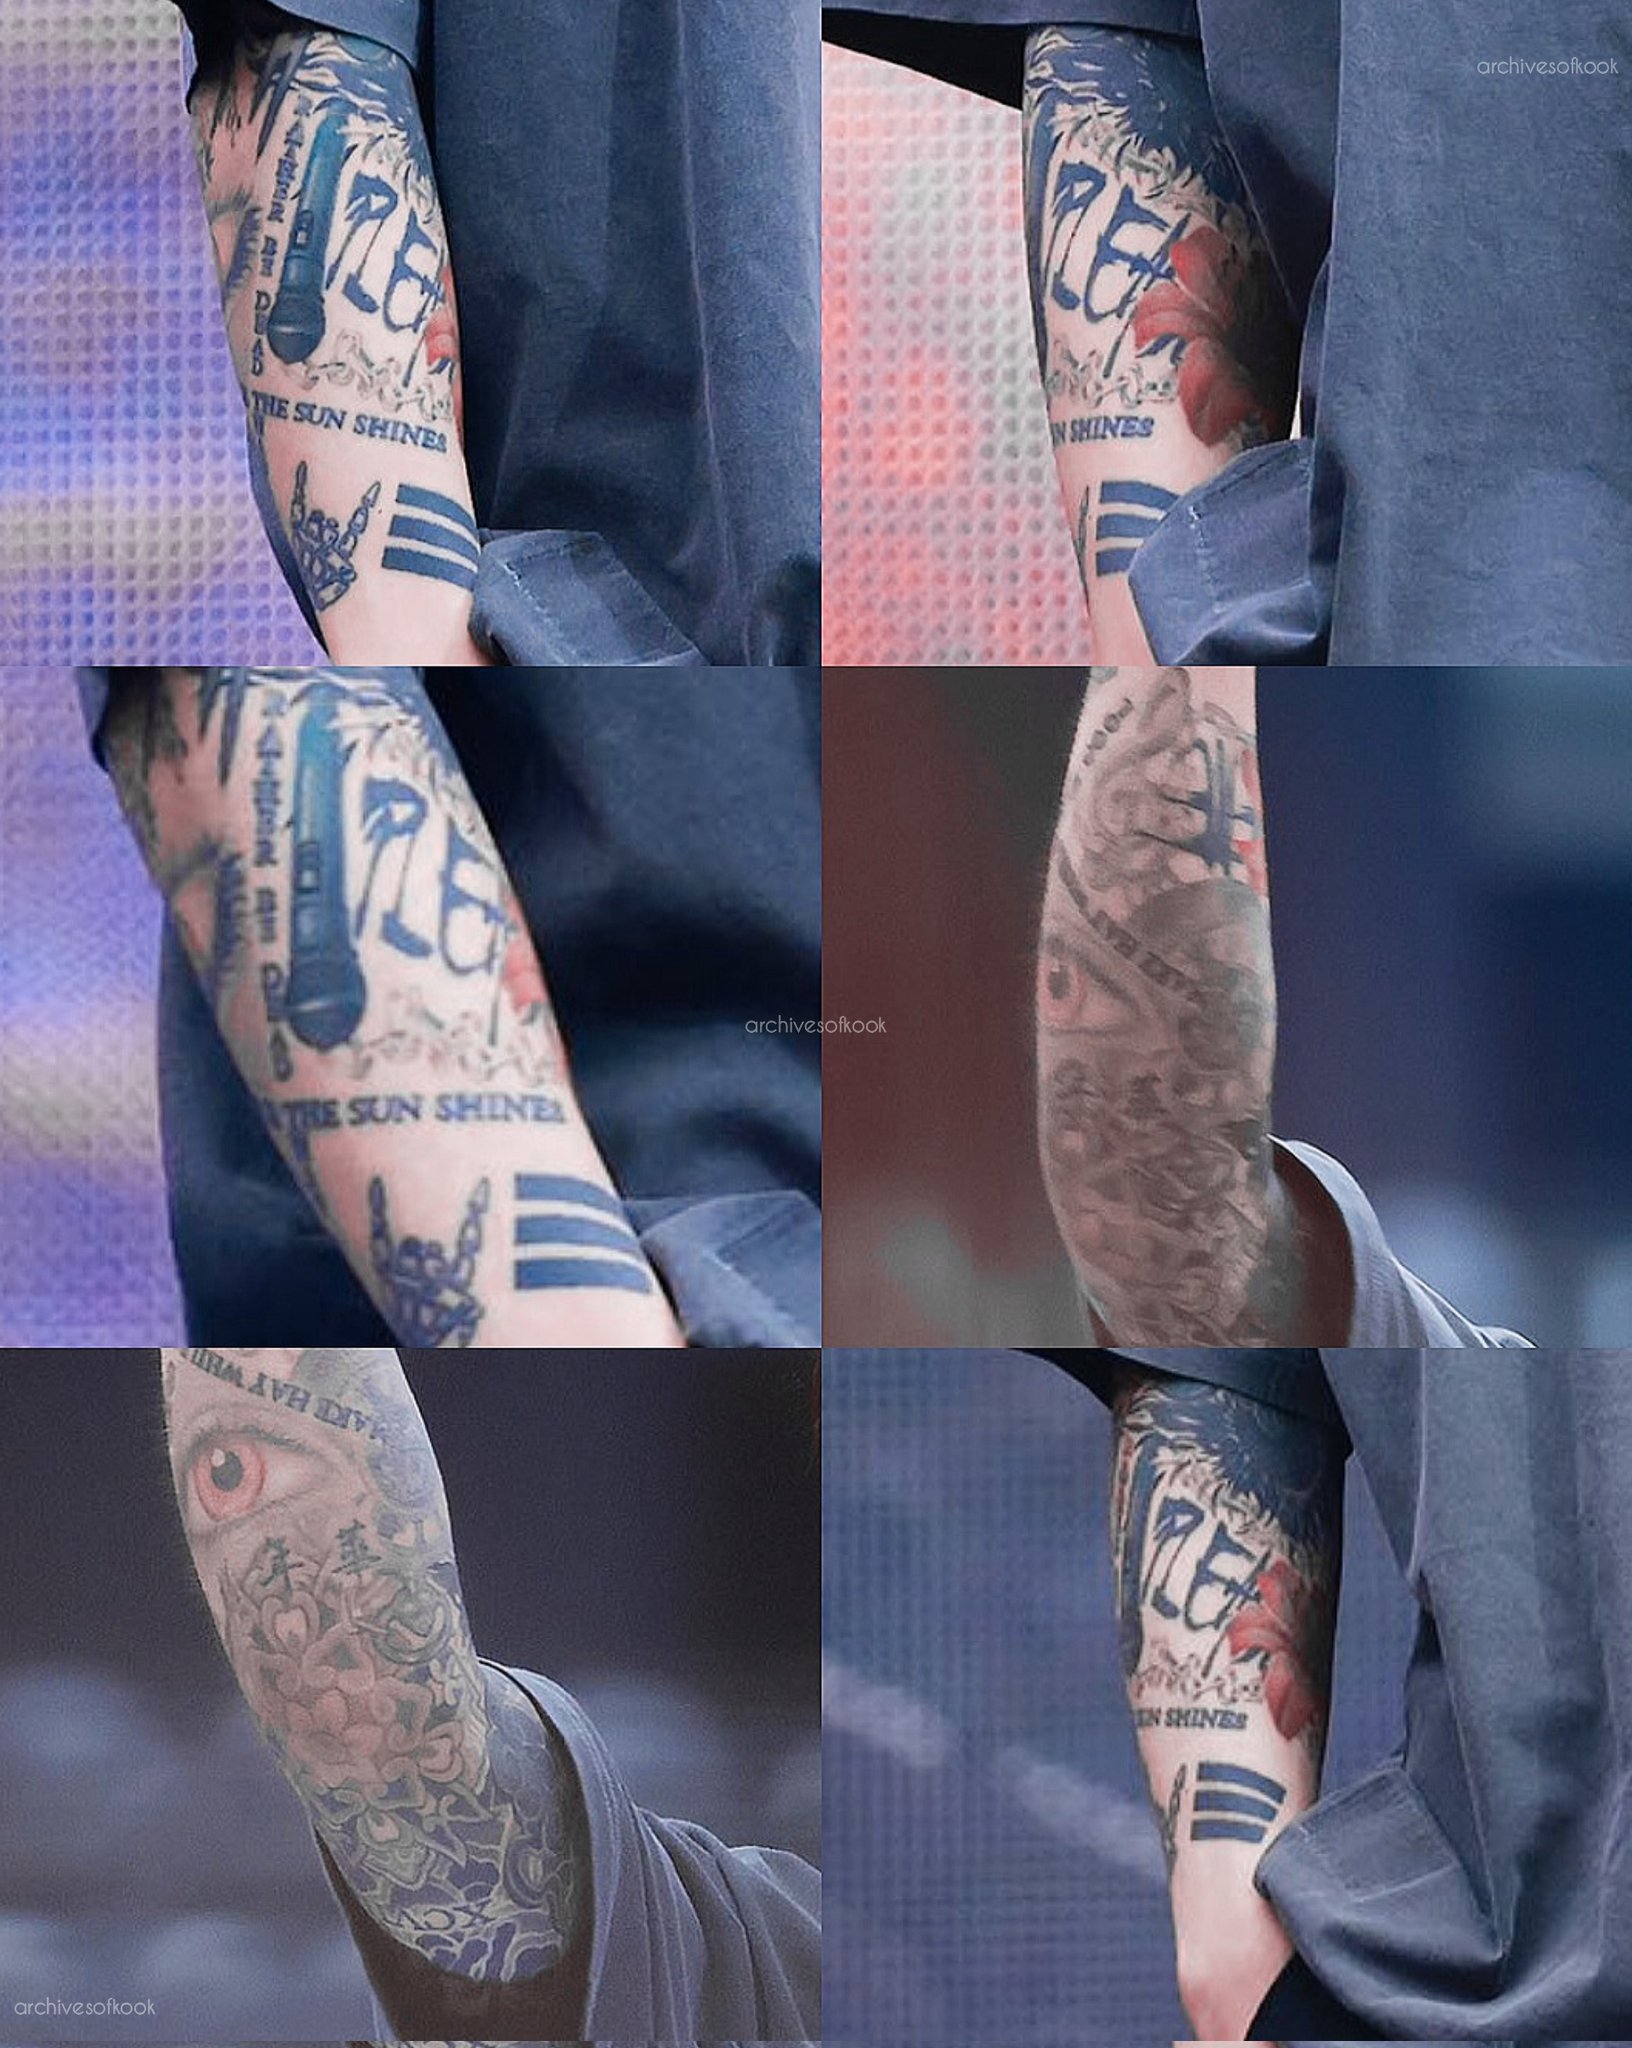 Why did Jungkook changecover some of his tattoos  Quora